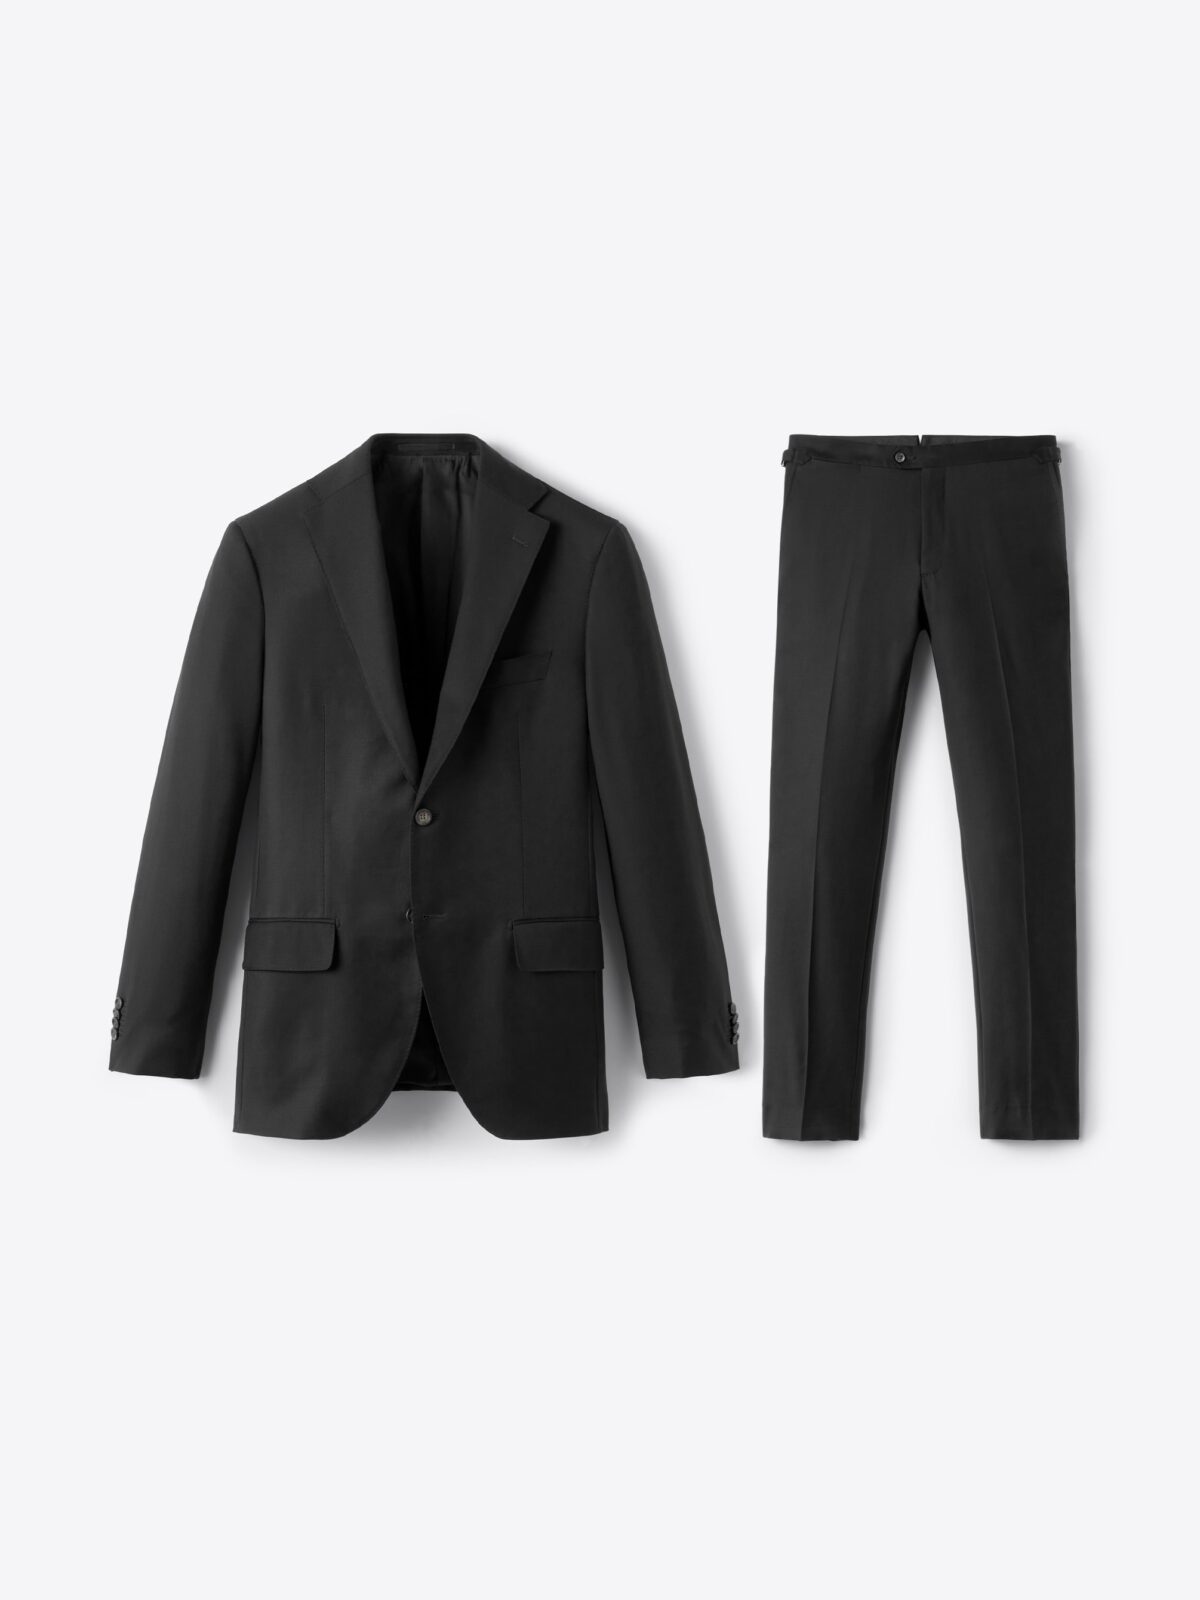 Black Allen Suit with Side Tab Dress Pant - Custom Fit Tailored Clothing